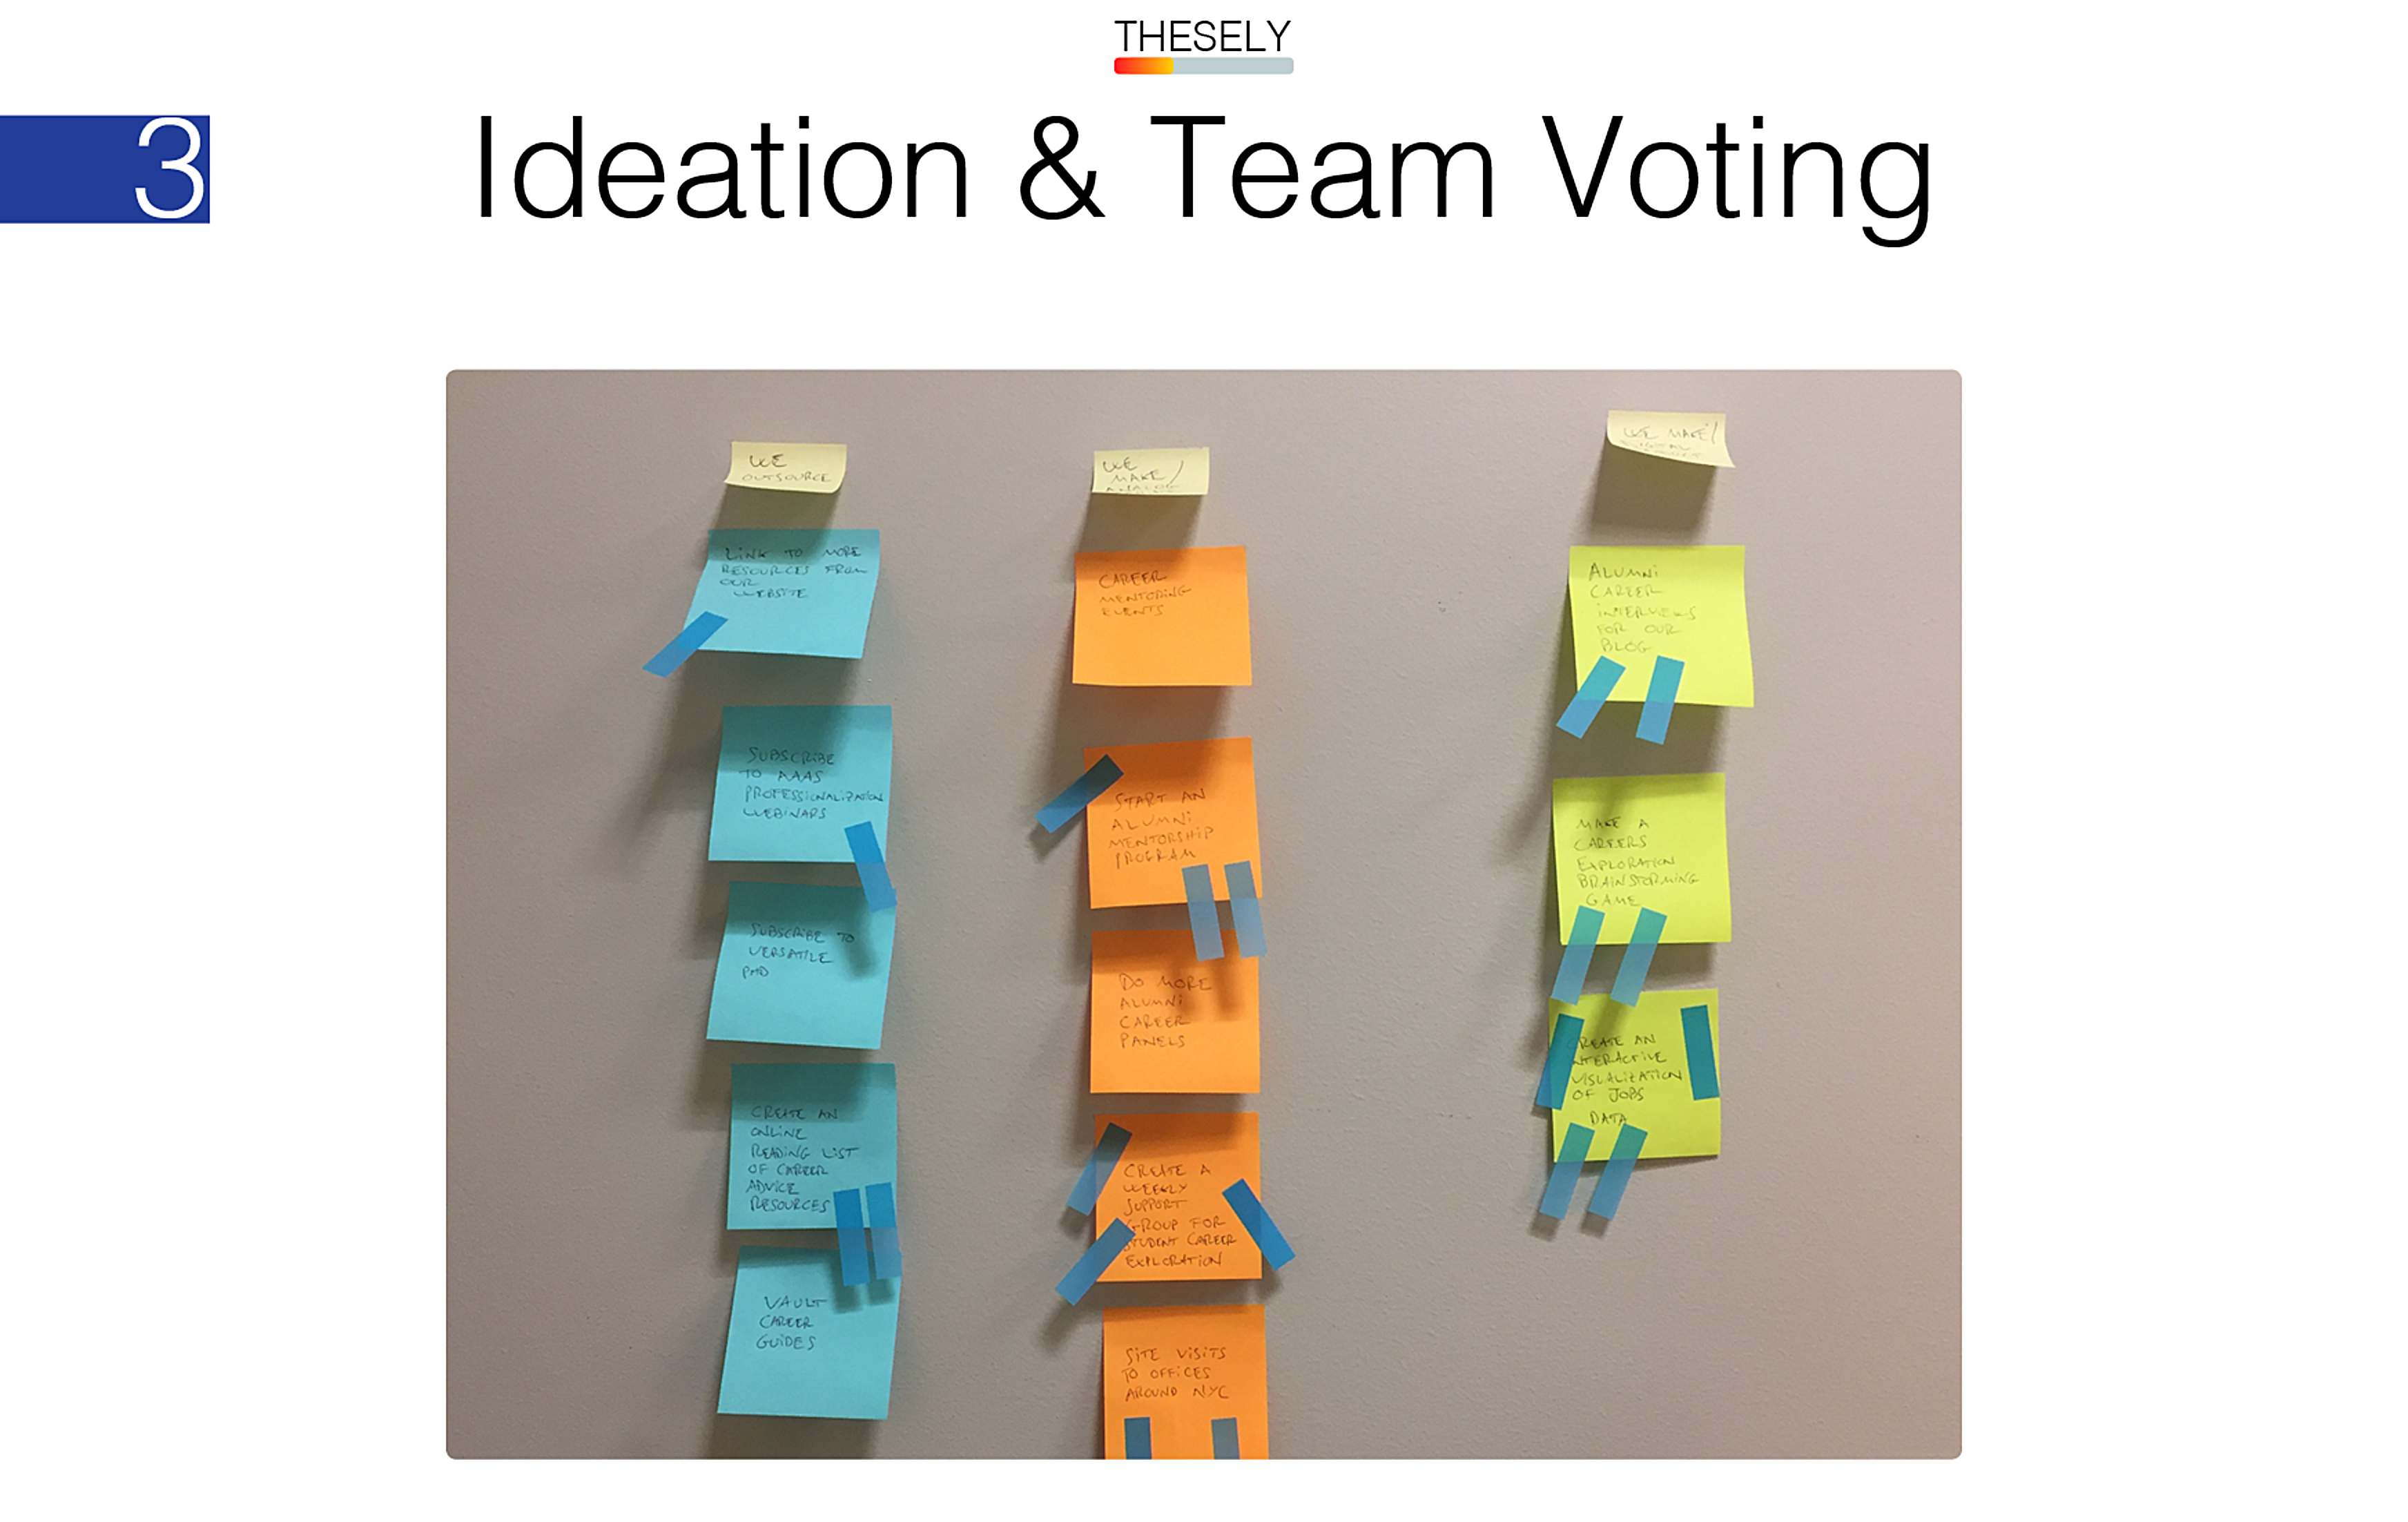 ideating solutions to our challenge by using brainstorming, affinity mapping, and voting on best solution